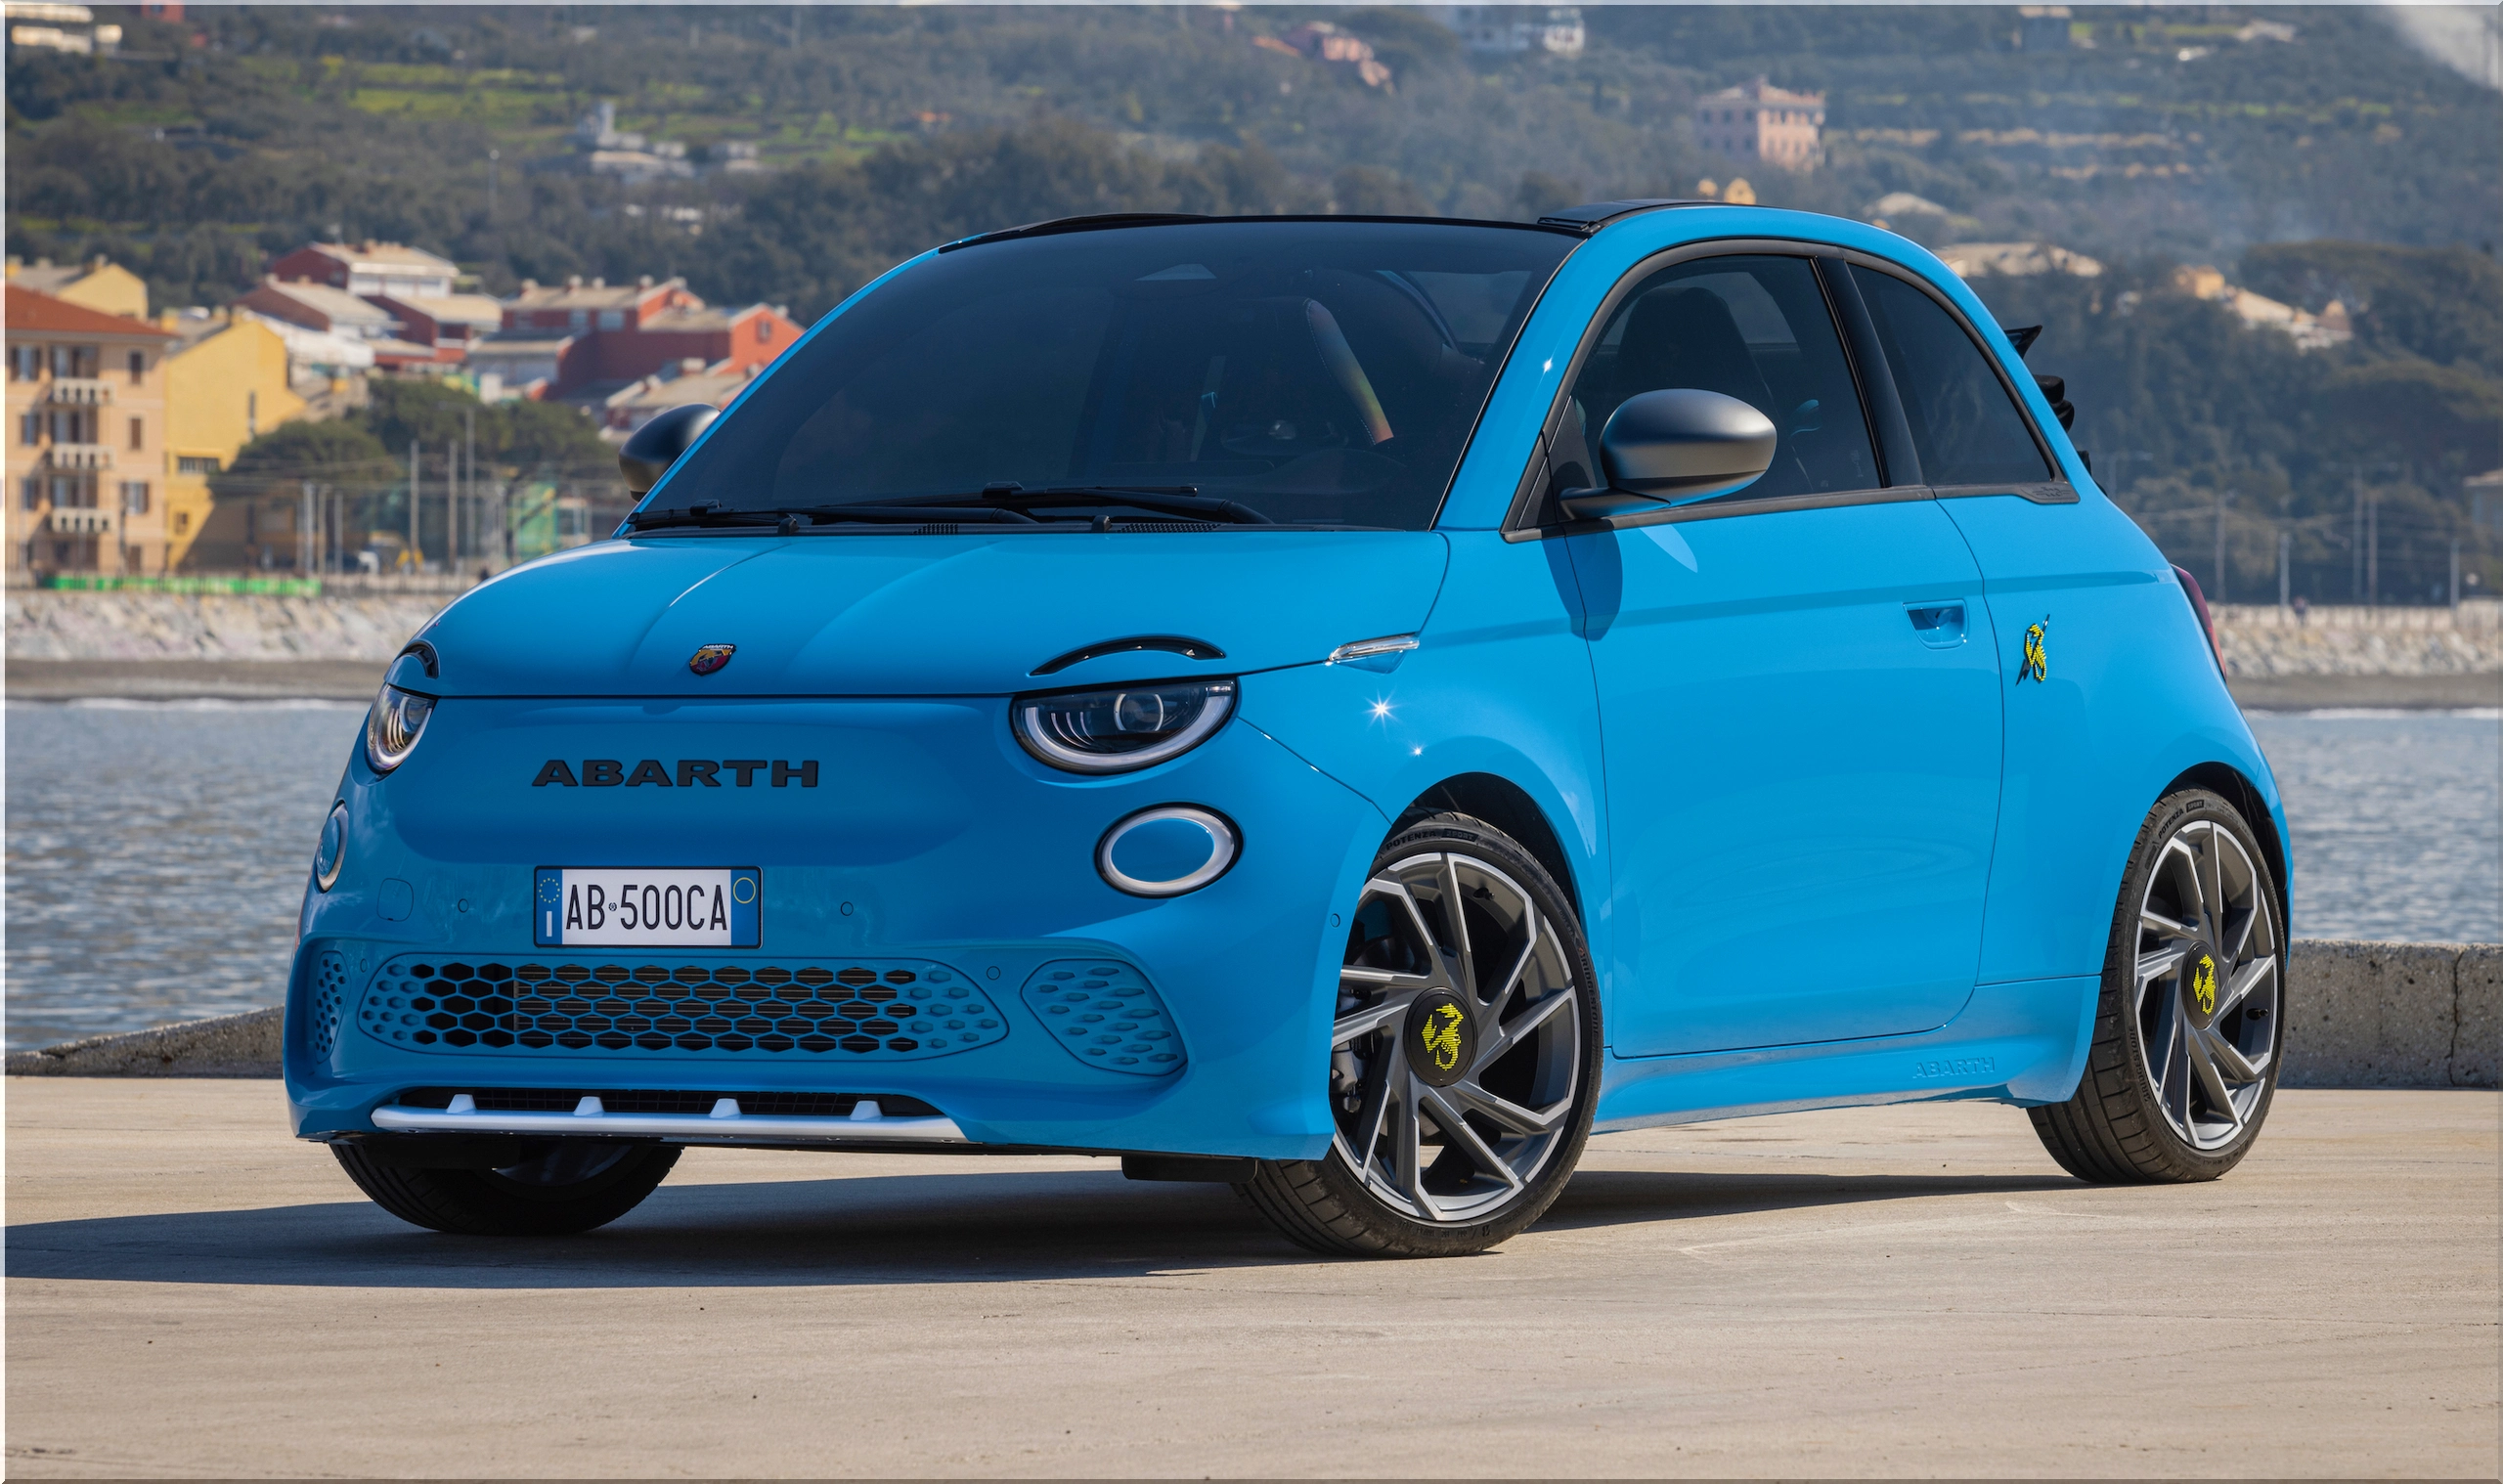 The new Abarth 500e is an electric hot hatch with 149bhp